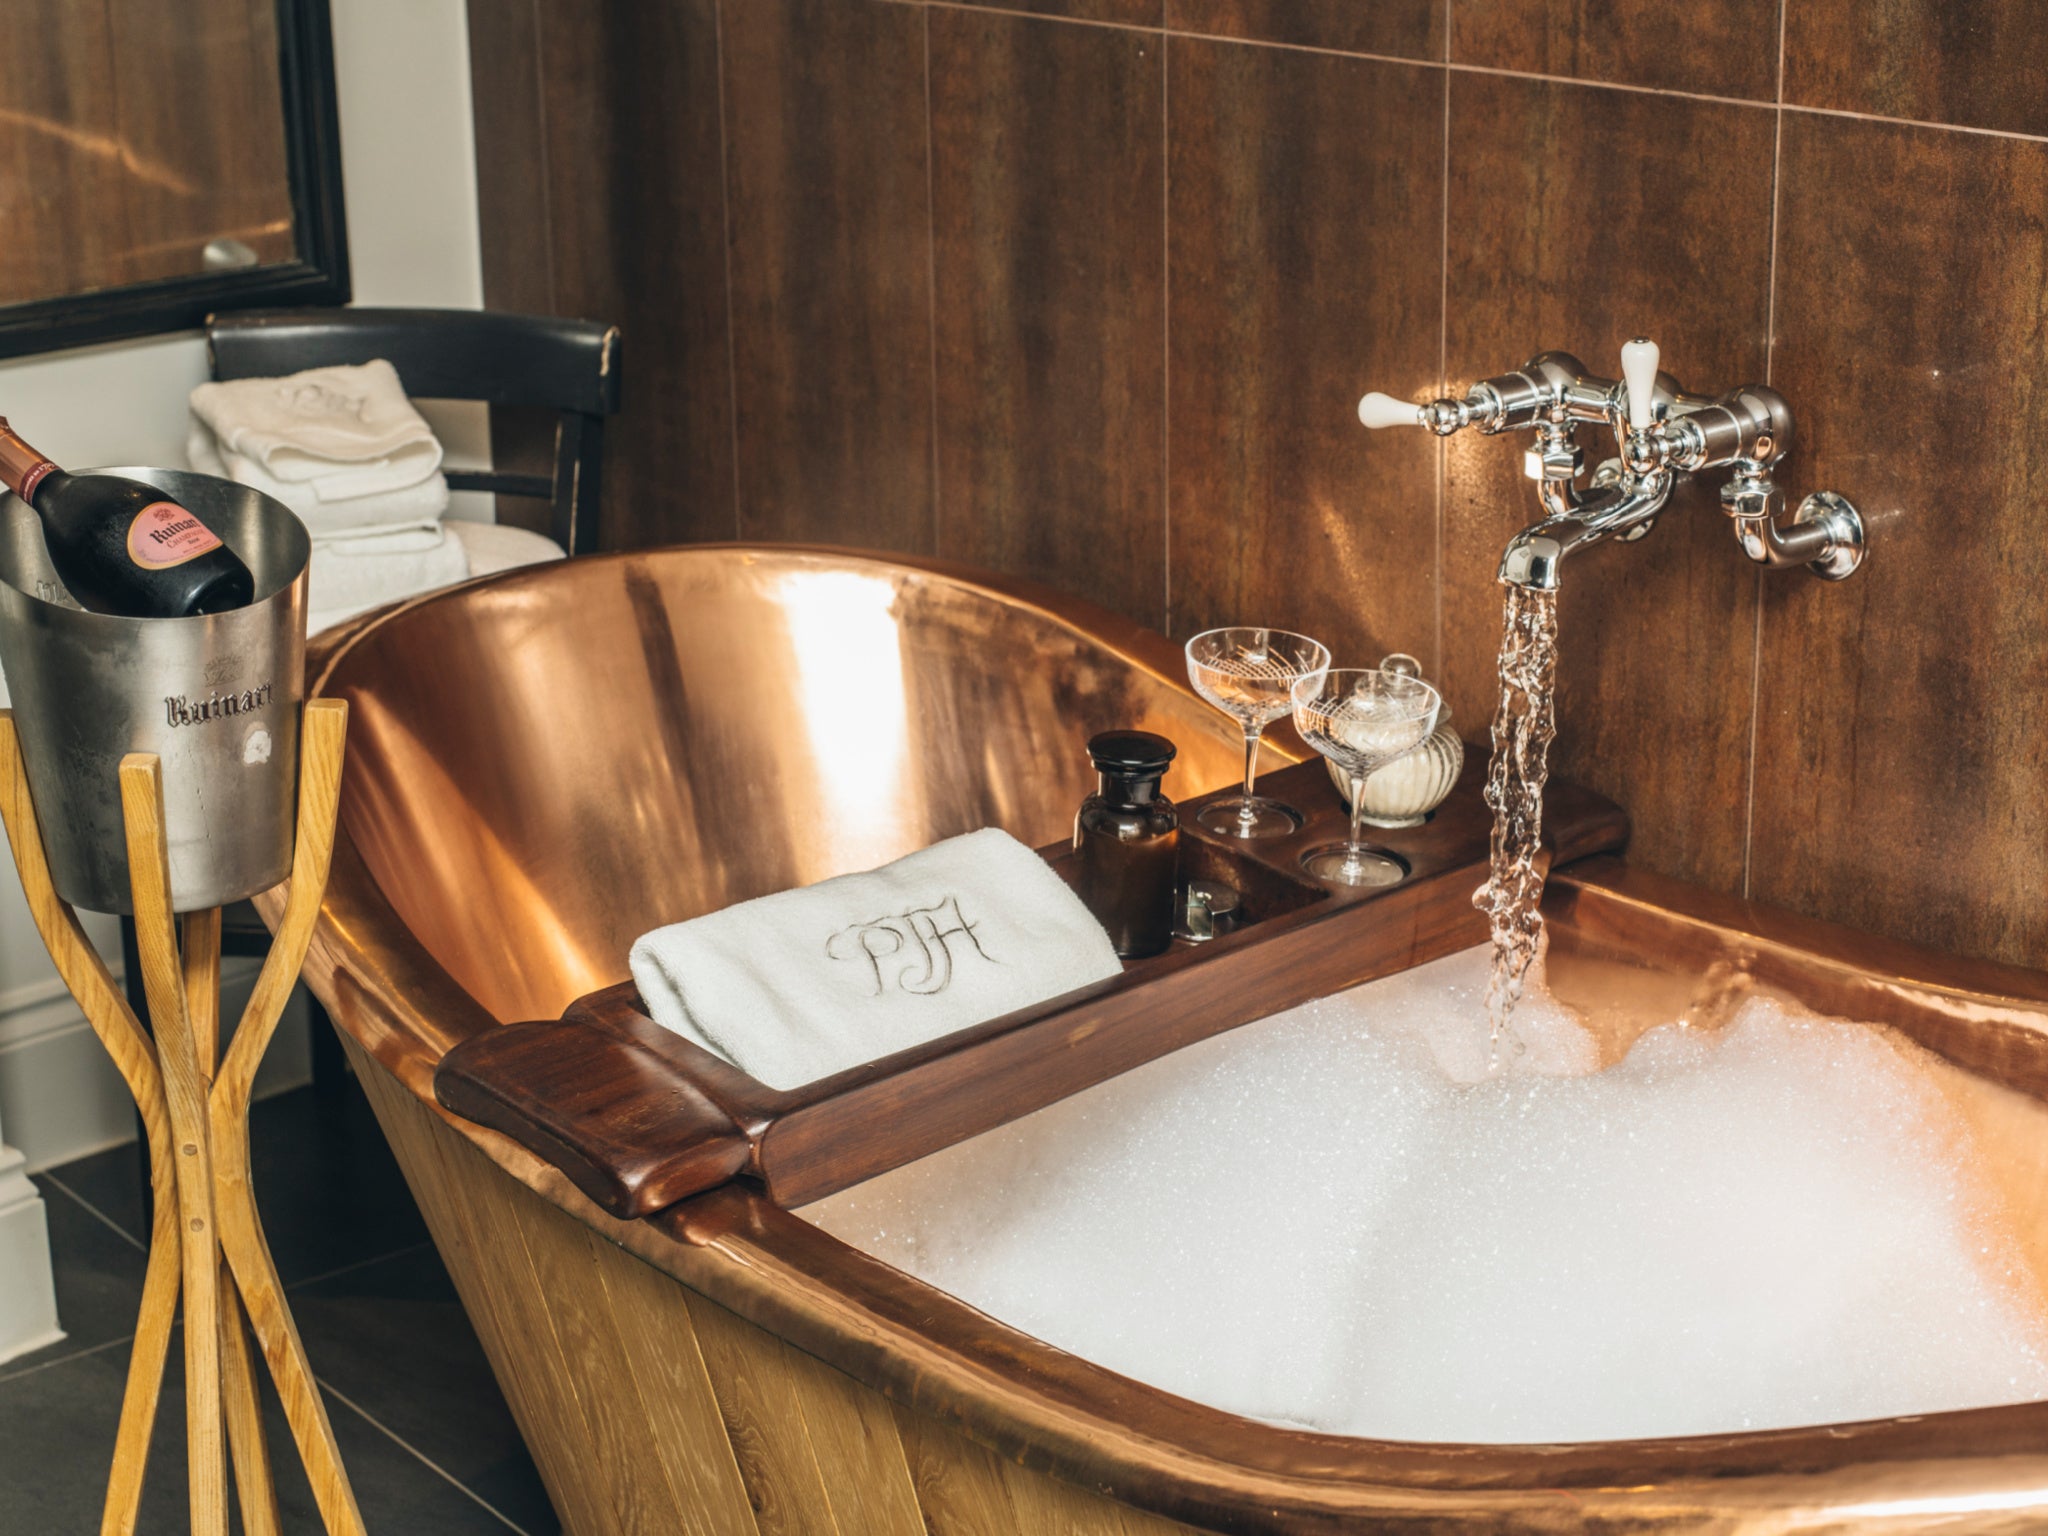 Suites in the Padstow Townhouse have claw-foot baths and antique fireplaces